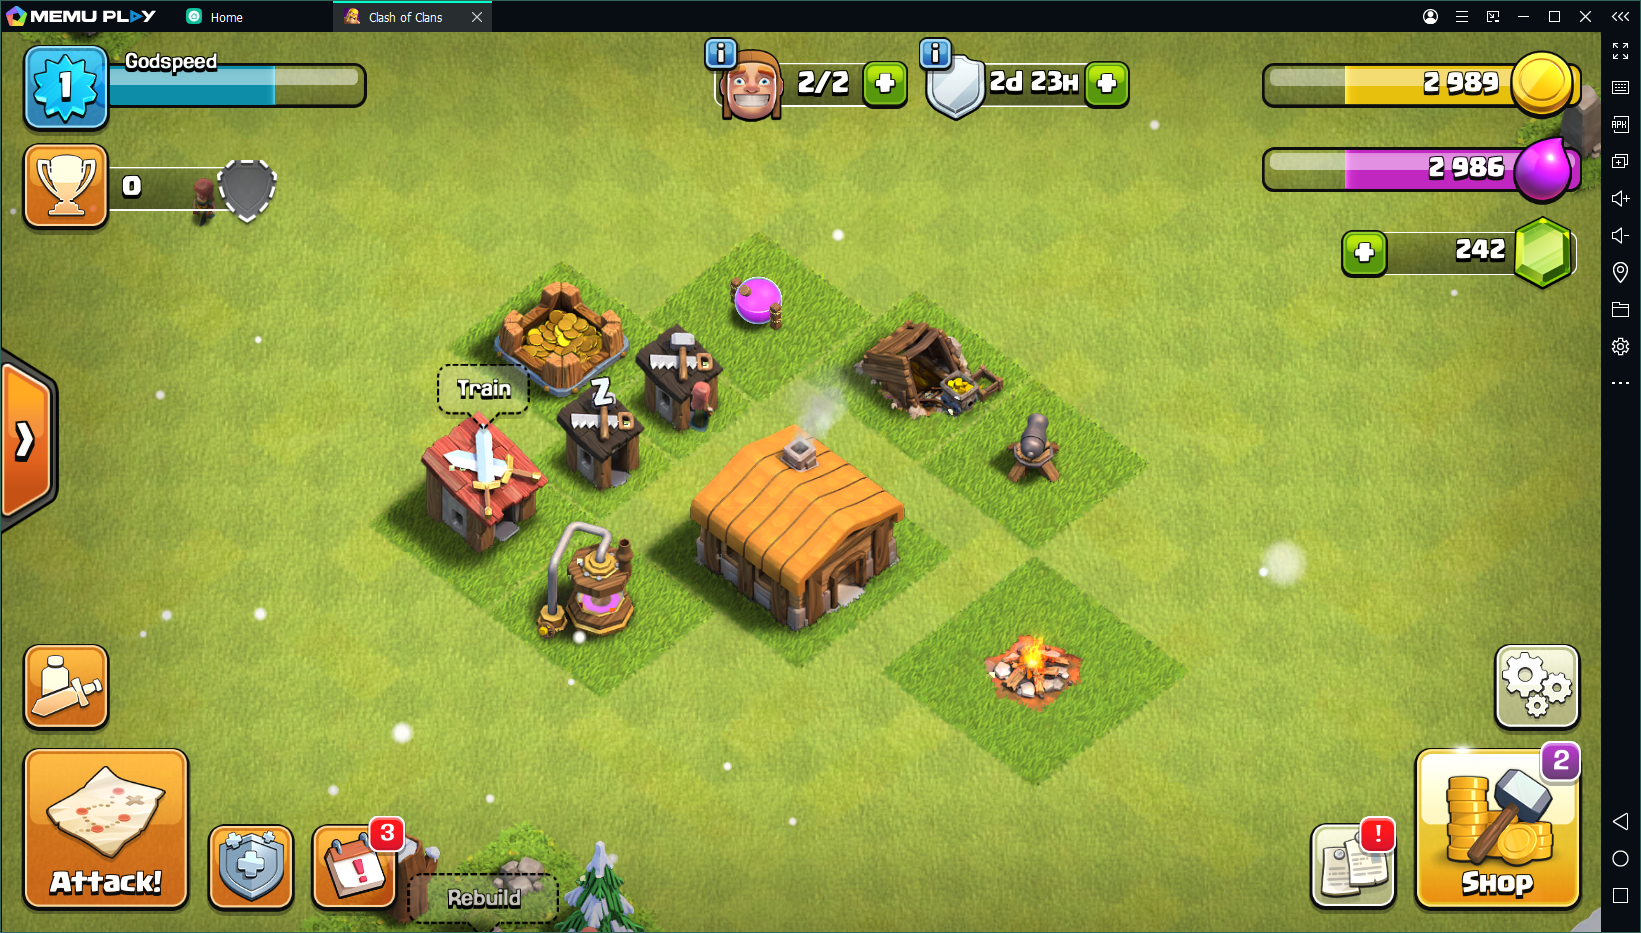 Clash of Clans on a PC using the Memu Play emulator